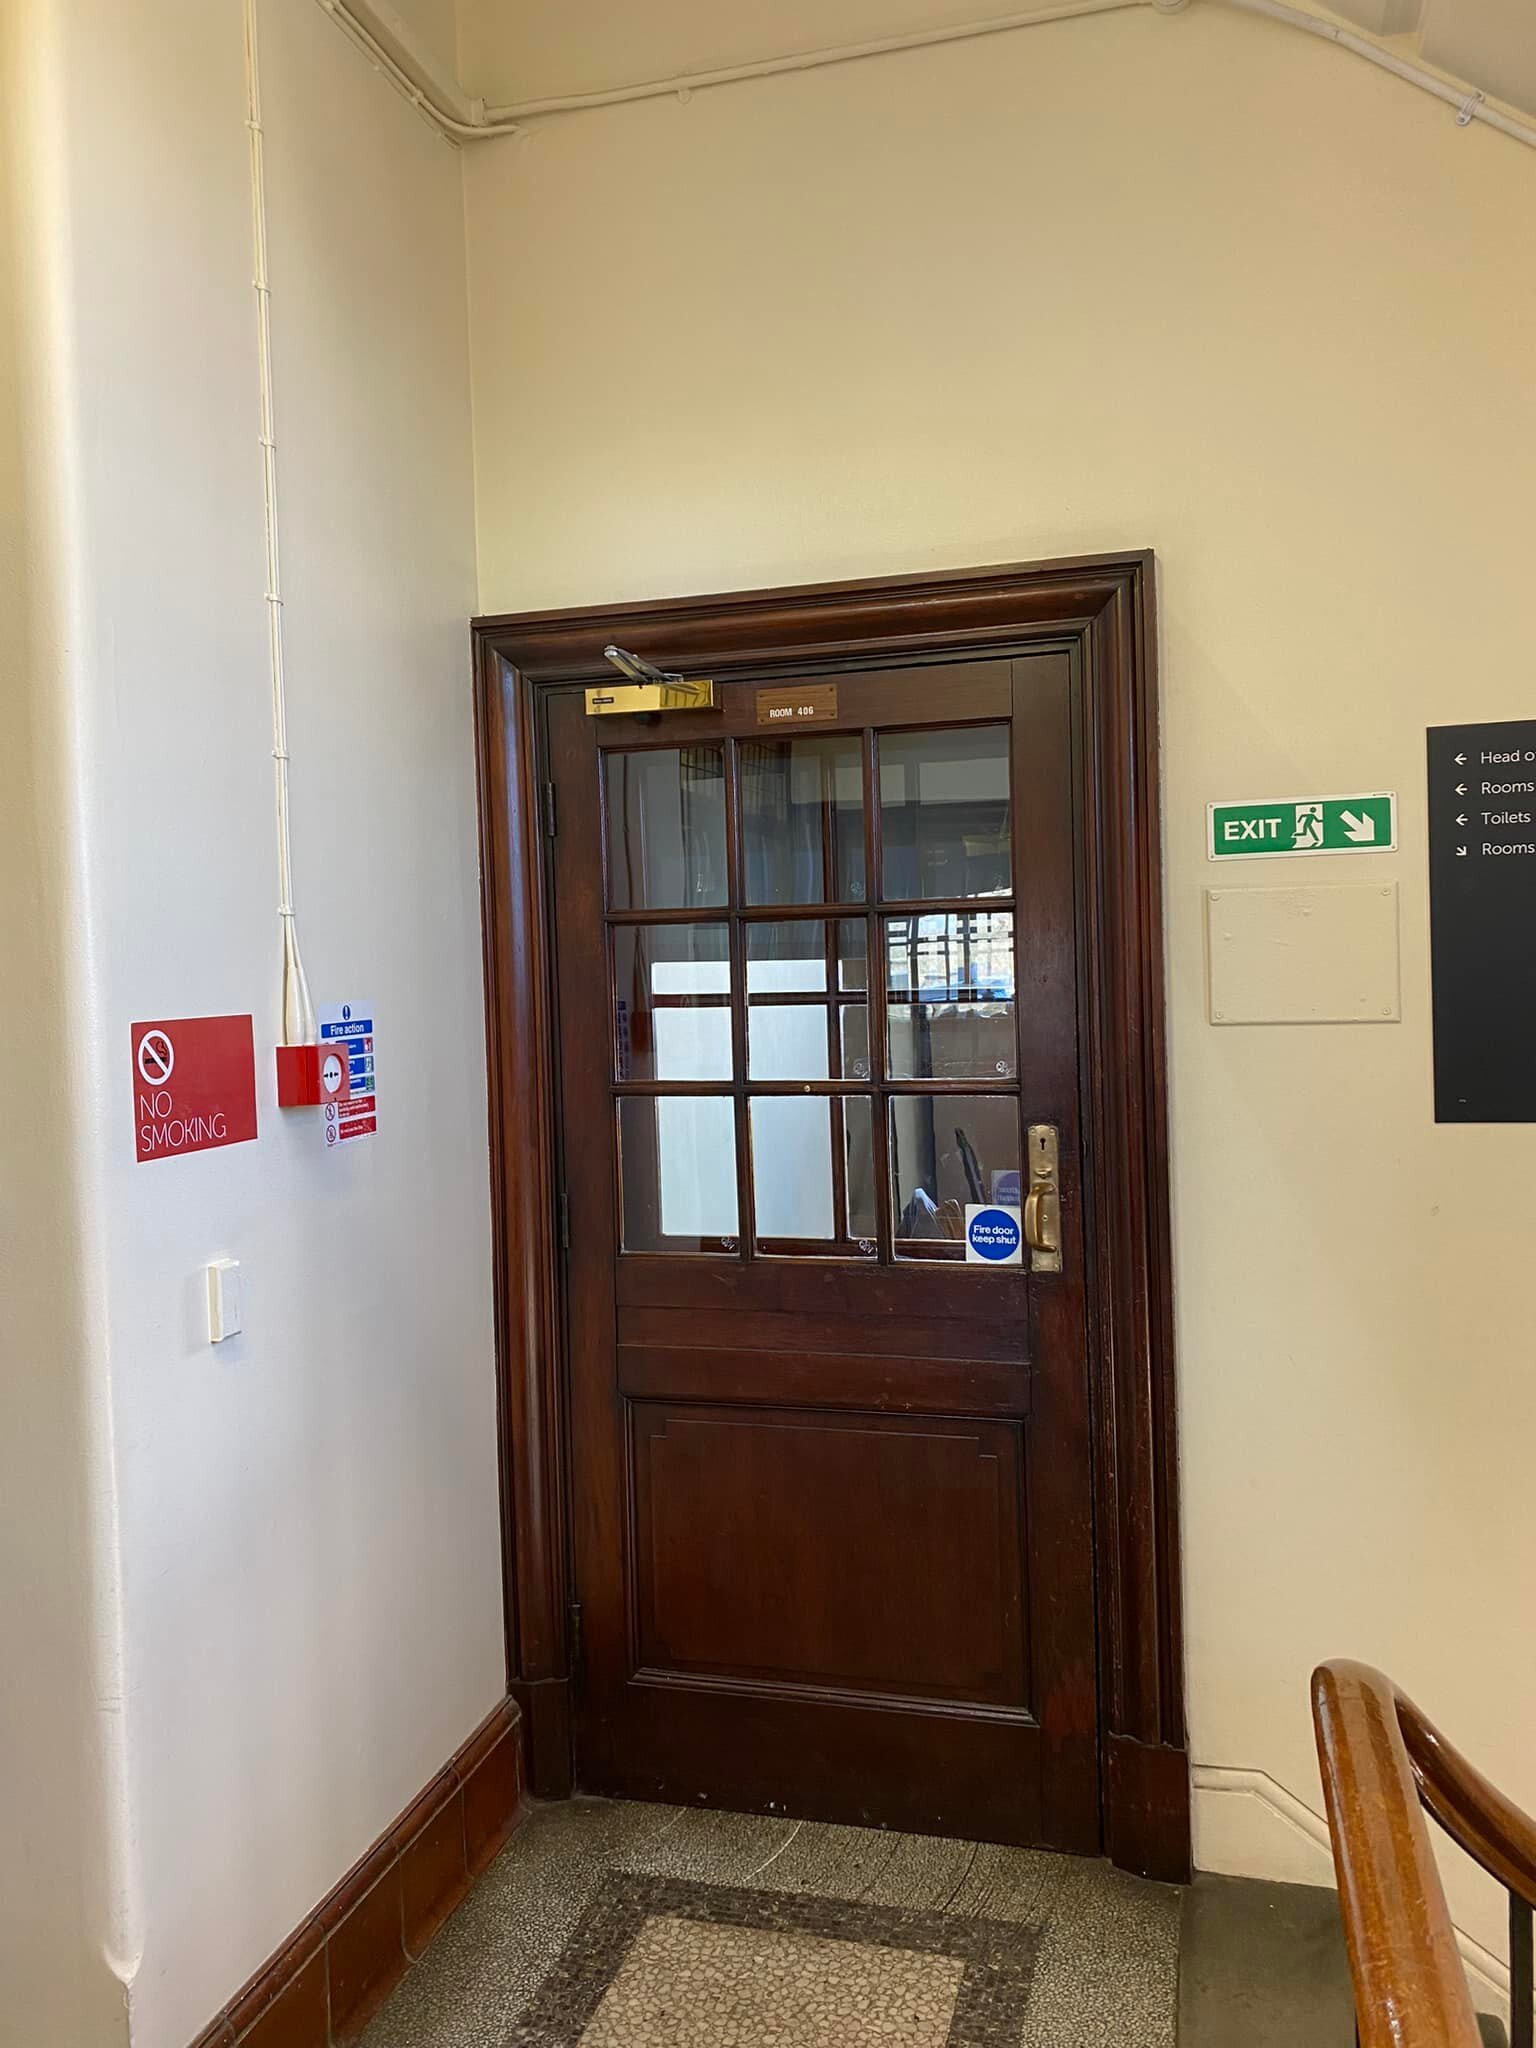 At the RAM today and popped up to see if rm 50 (John Davies&rsquo; room) is still there &hellip; happily it is! It&rsquo;s good to see some things still remain without being disturbed too much by the passage of time&hellip;